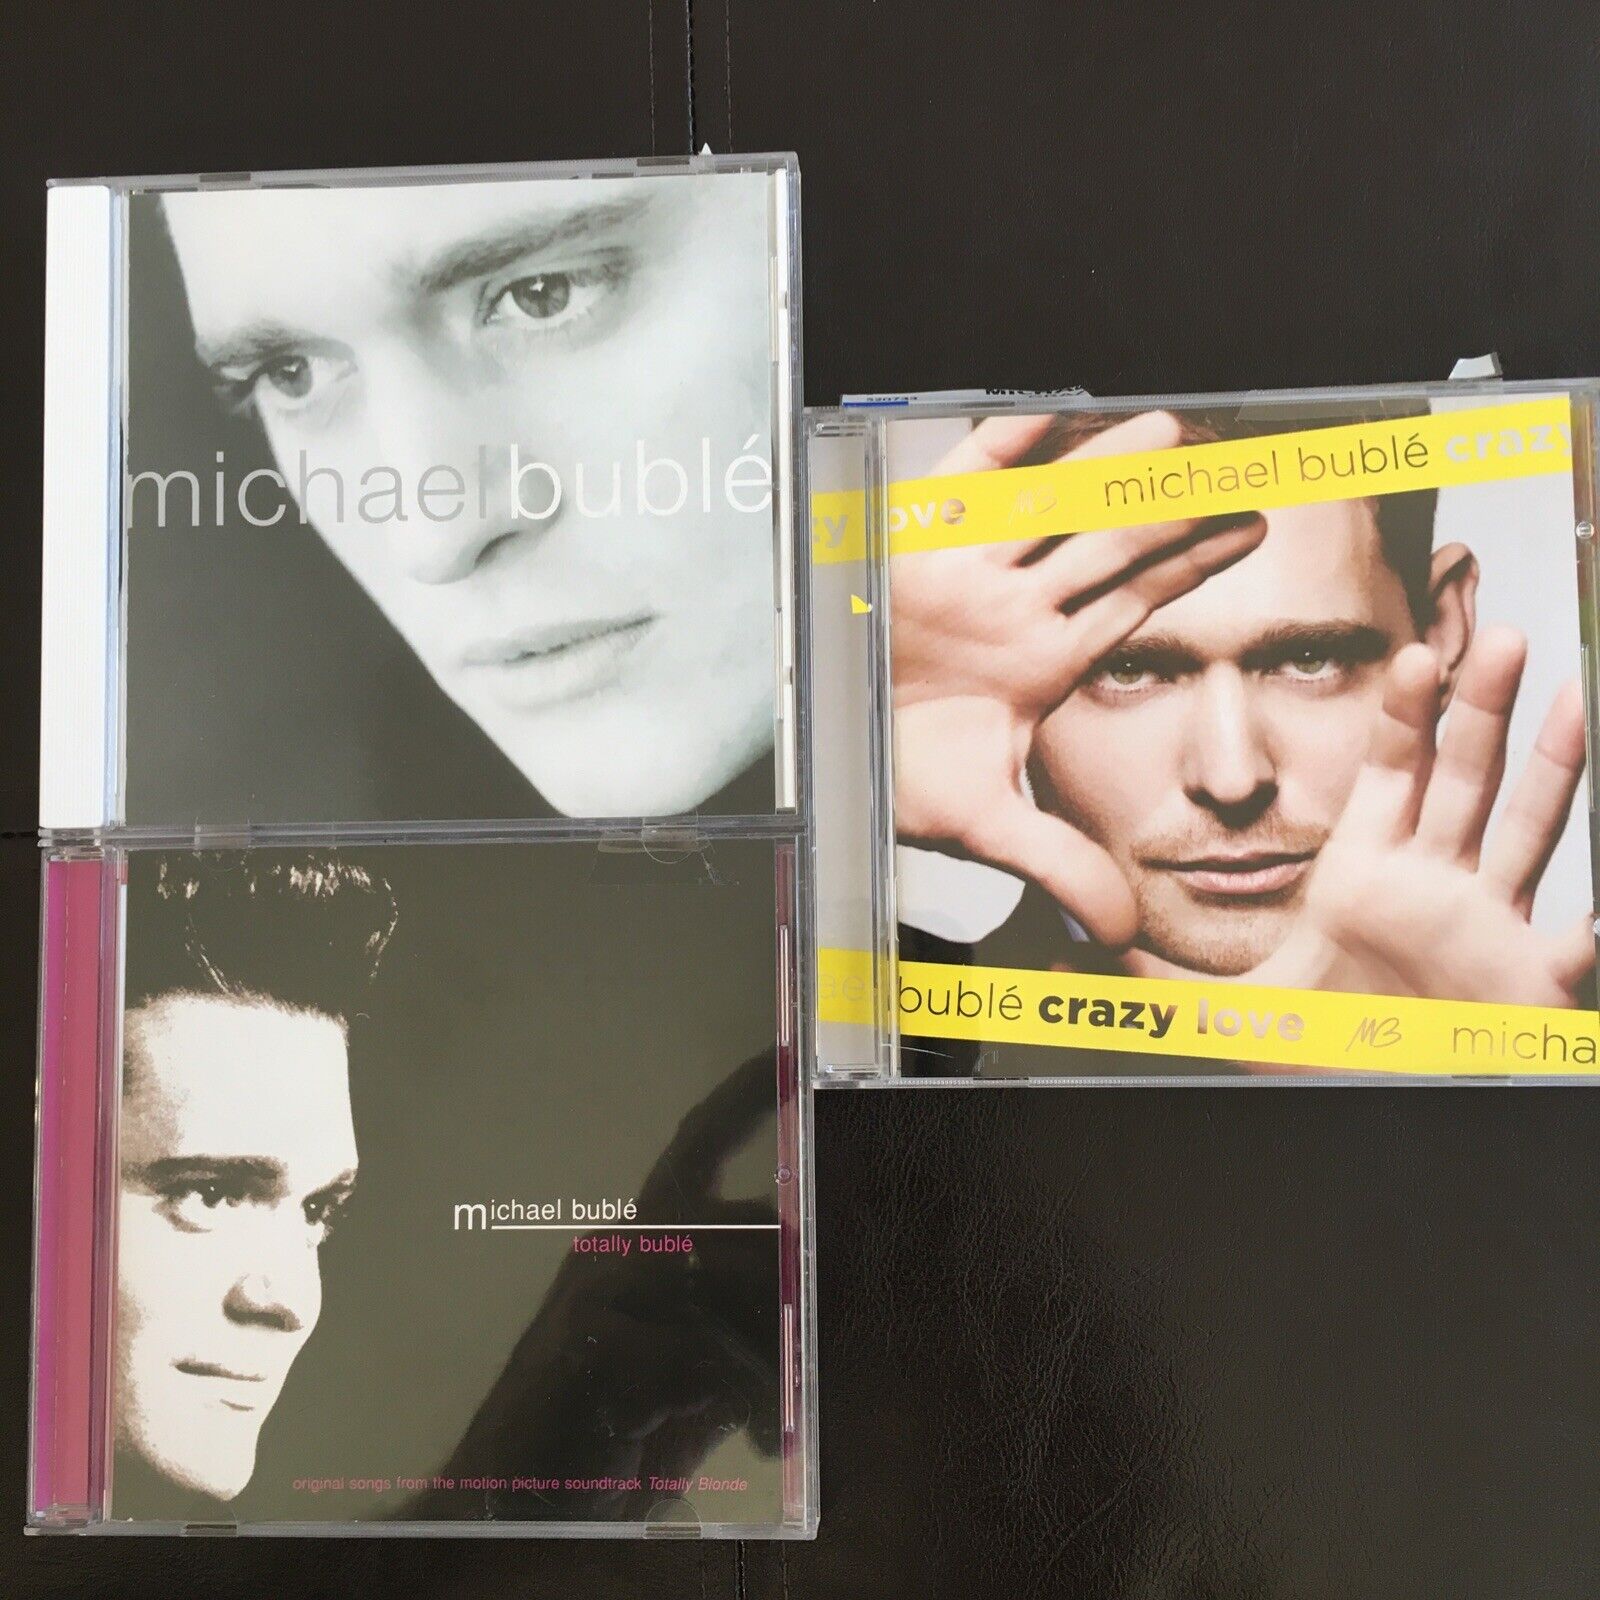 Lot of 3 Michael Bublé CD’s Totally Bublé, Crazy Love, And Self Titled